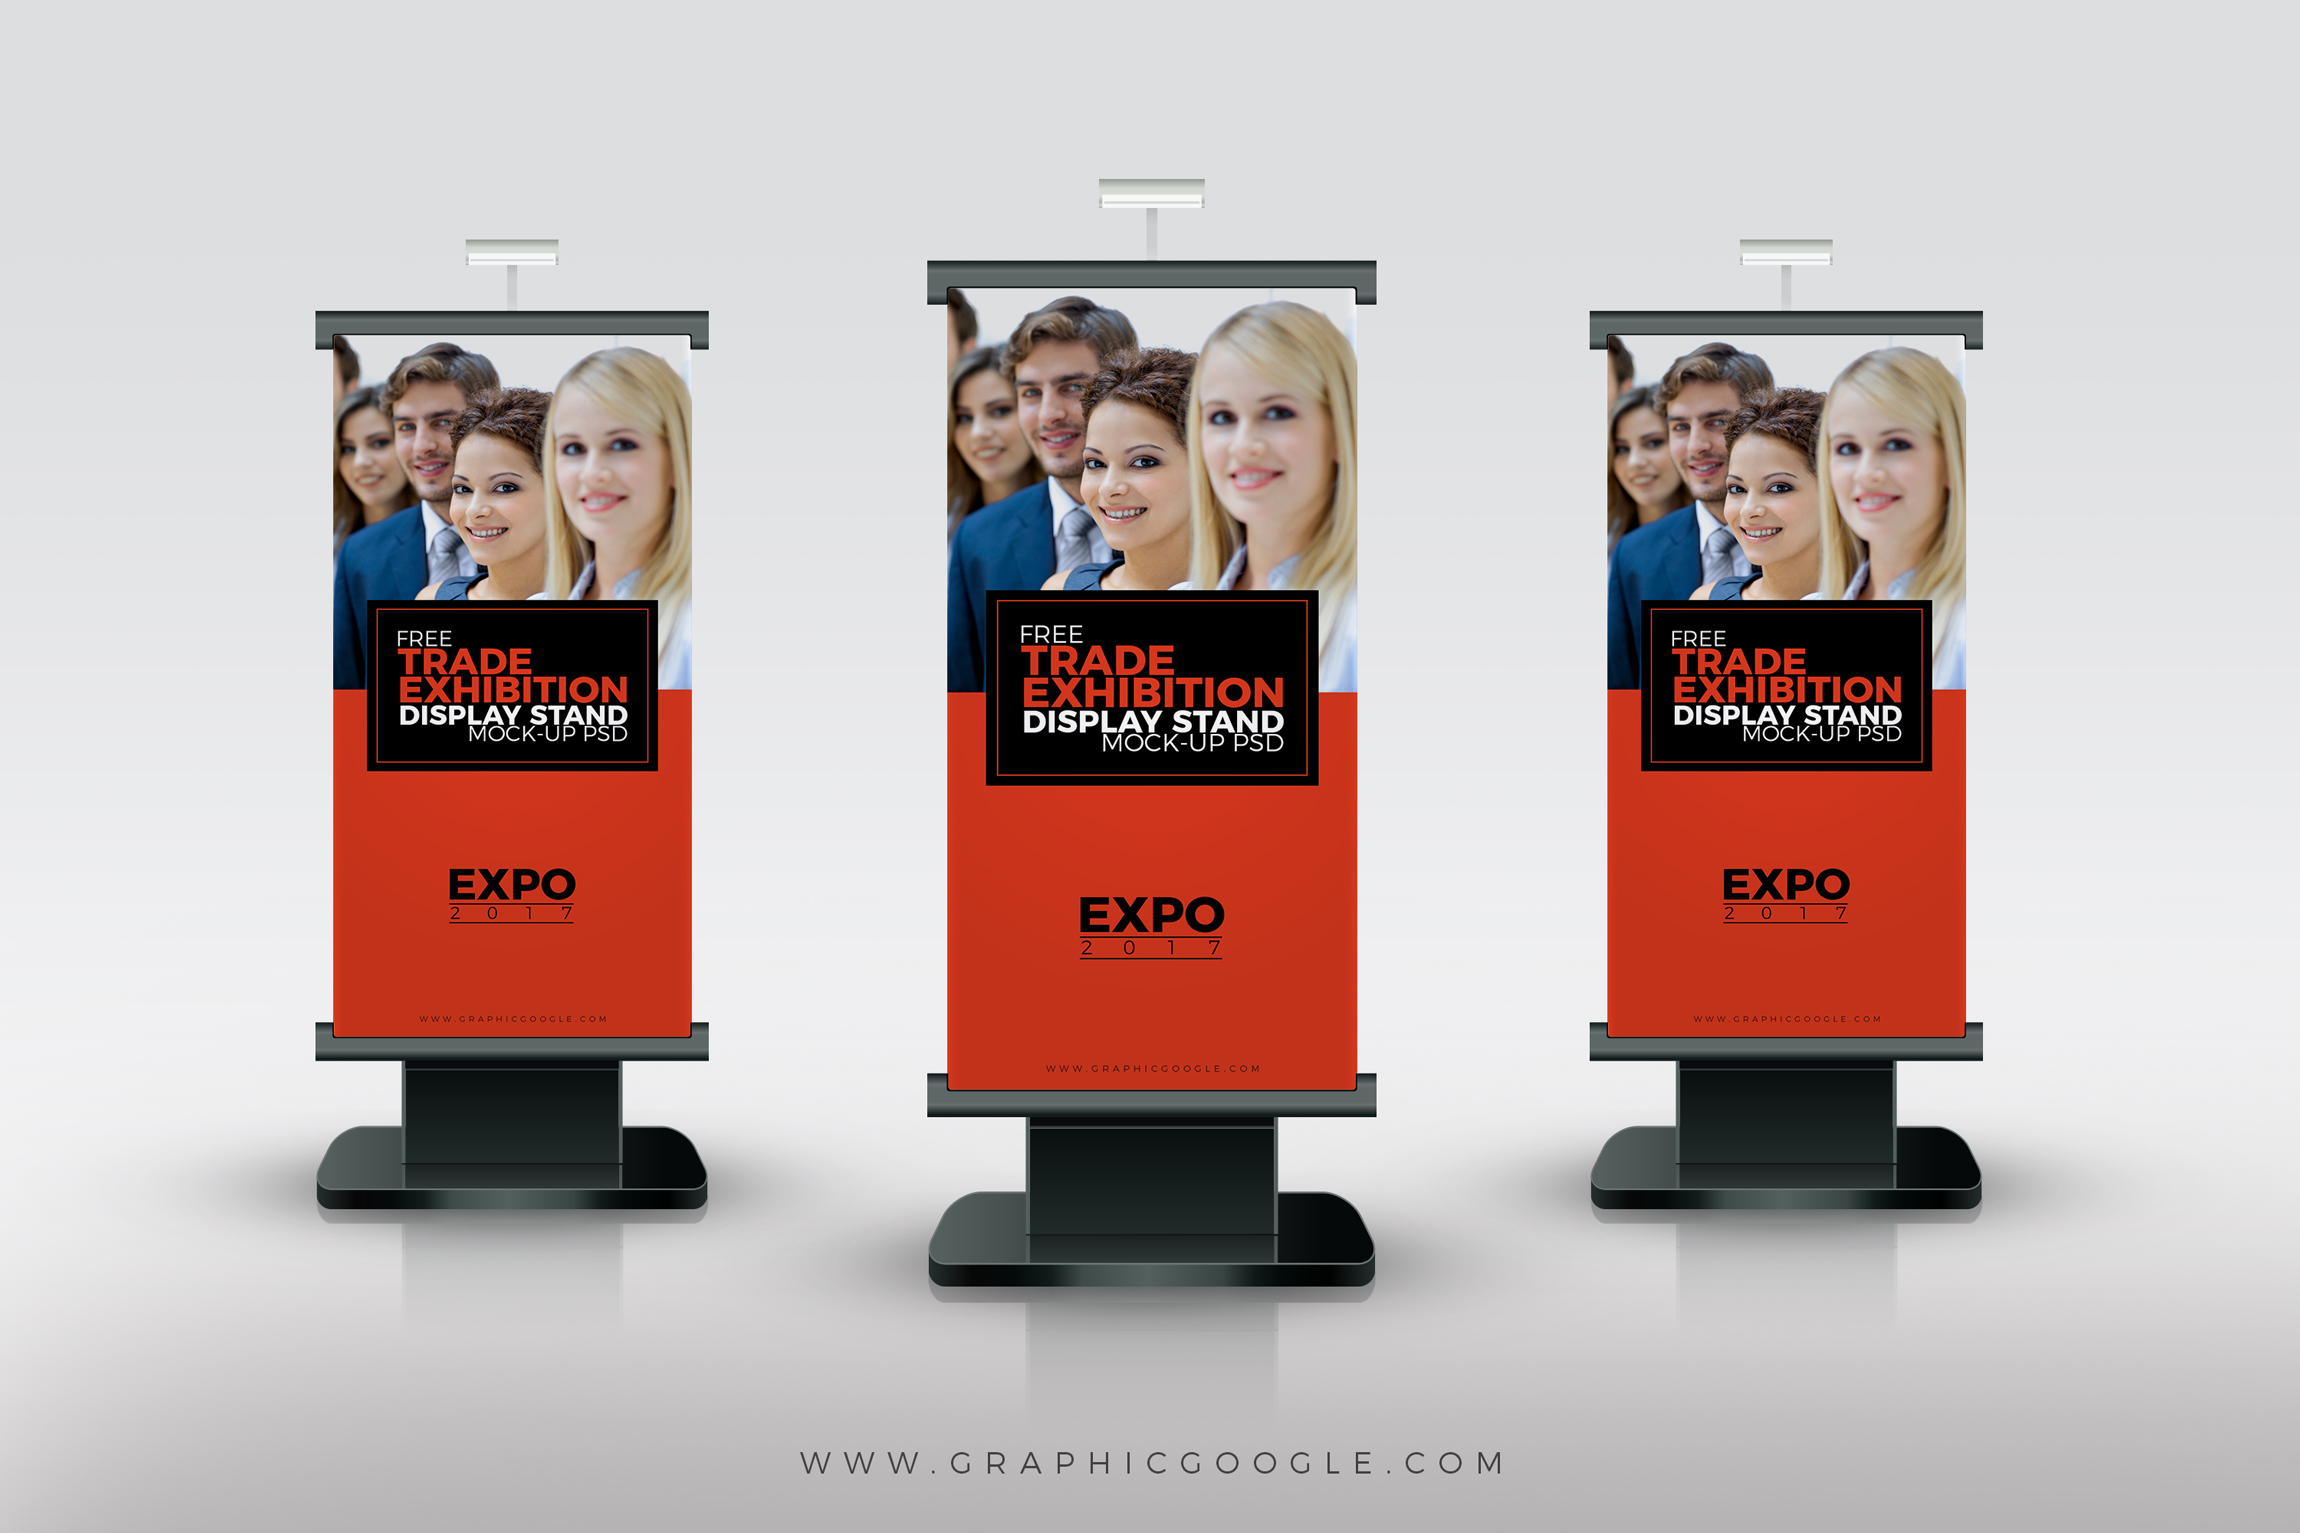 Download Free Trade Exhibition Display Stand Mock-up PsdGraphic Google - Tasty Graphic Designs Collection